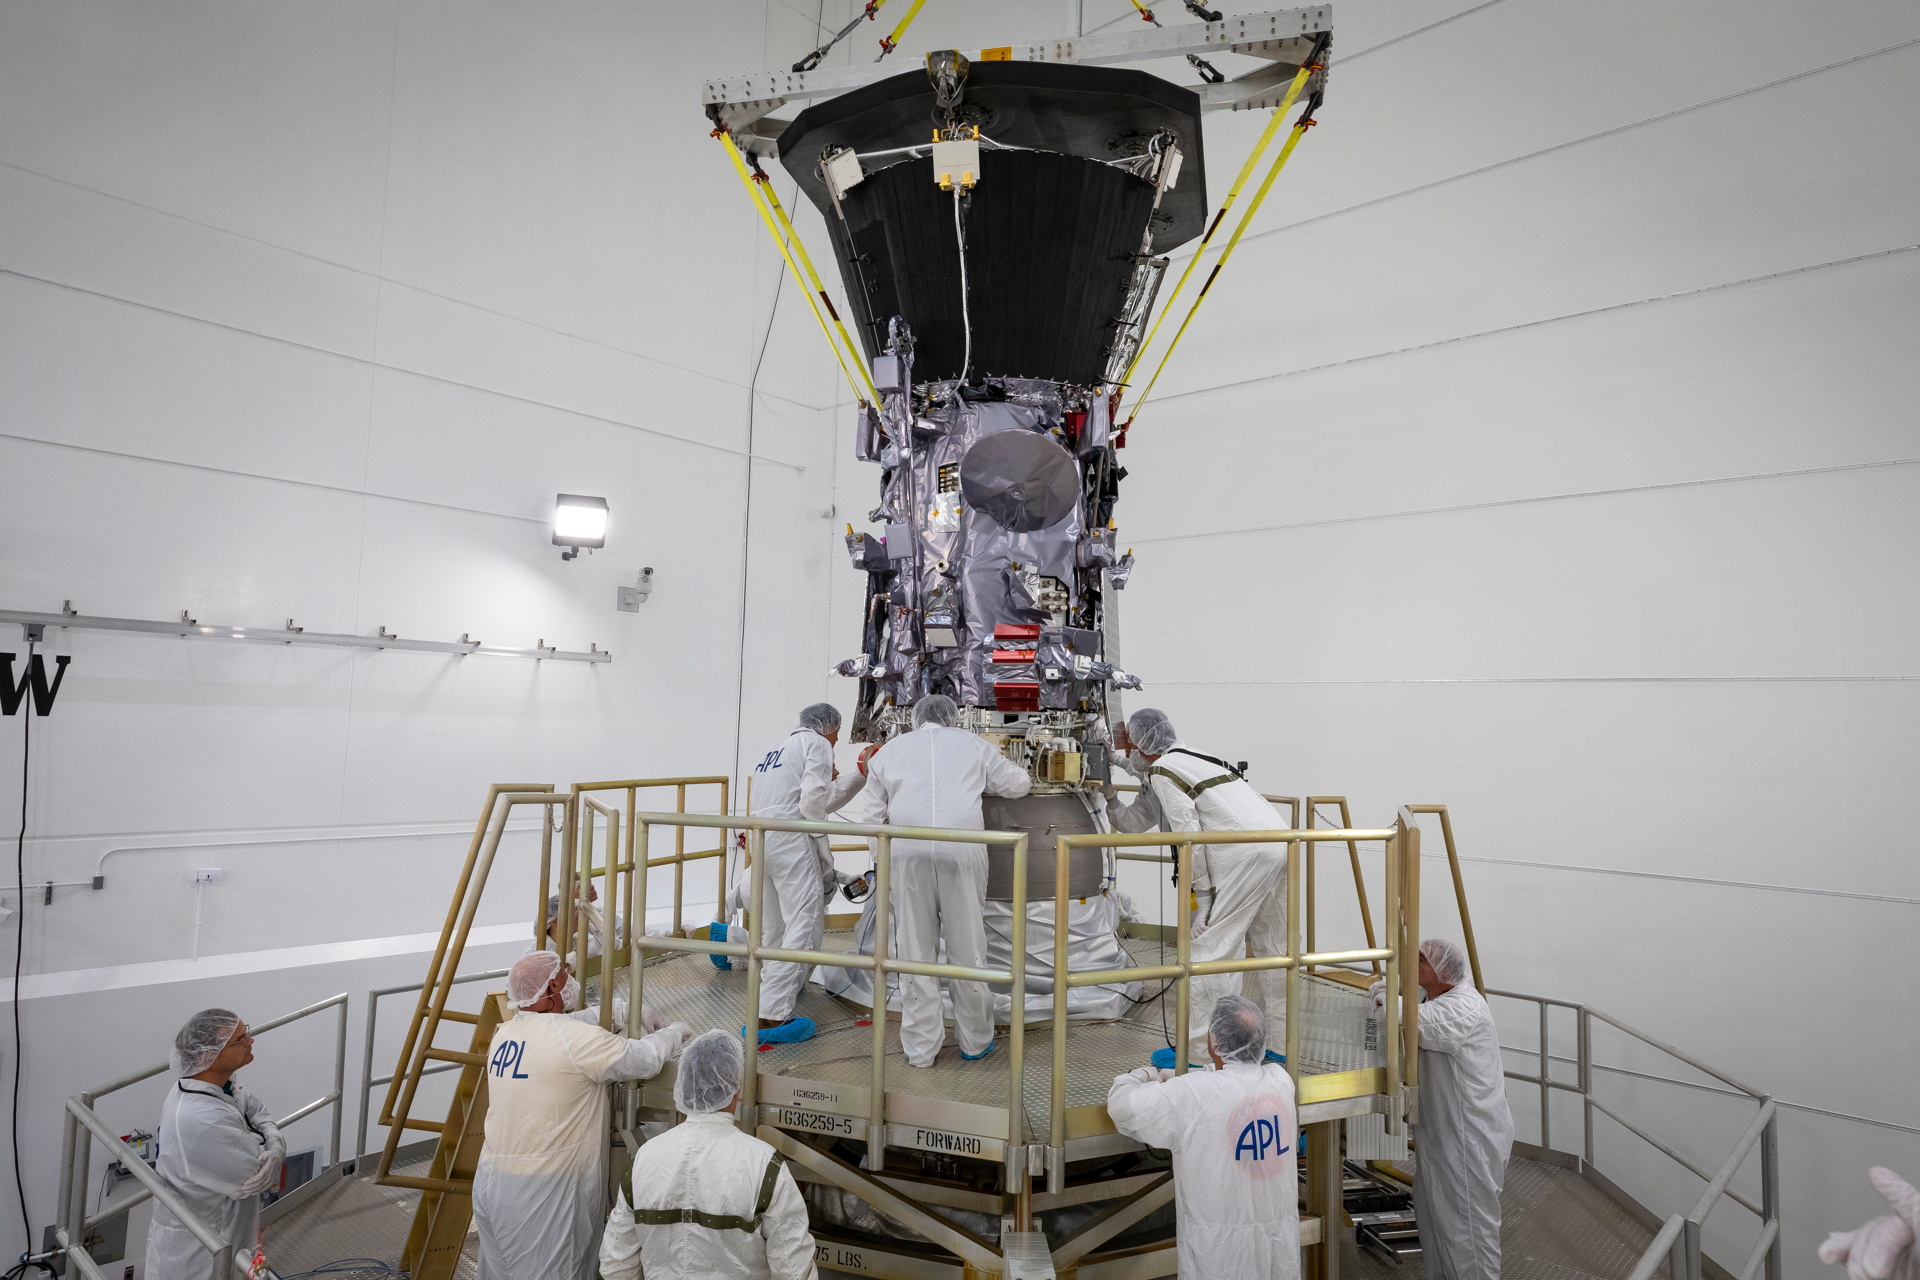 Parker Solar Probe is shown as it was mated to the third stage rocket motor on July 11, 2018, at Astrotech Space Operations in Titusville, Florida.